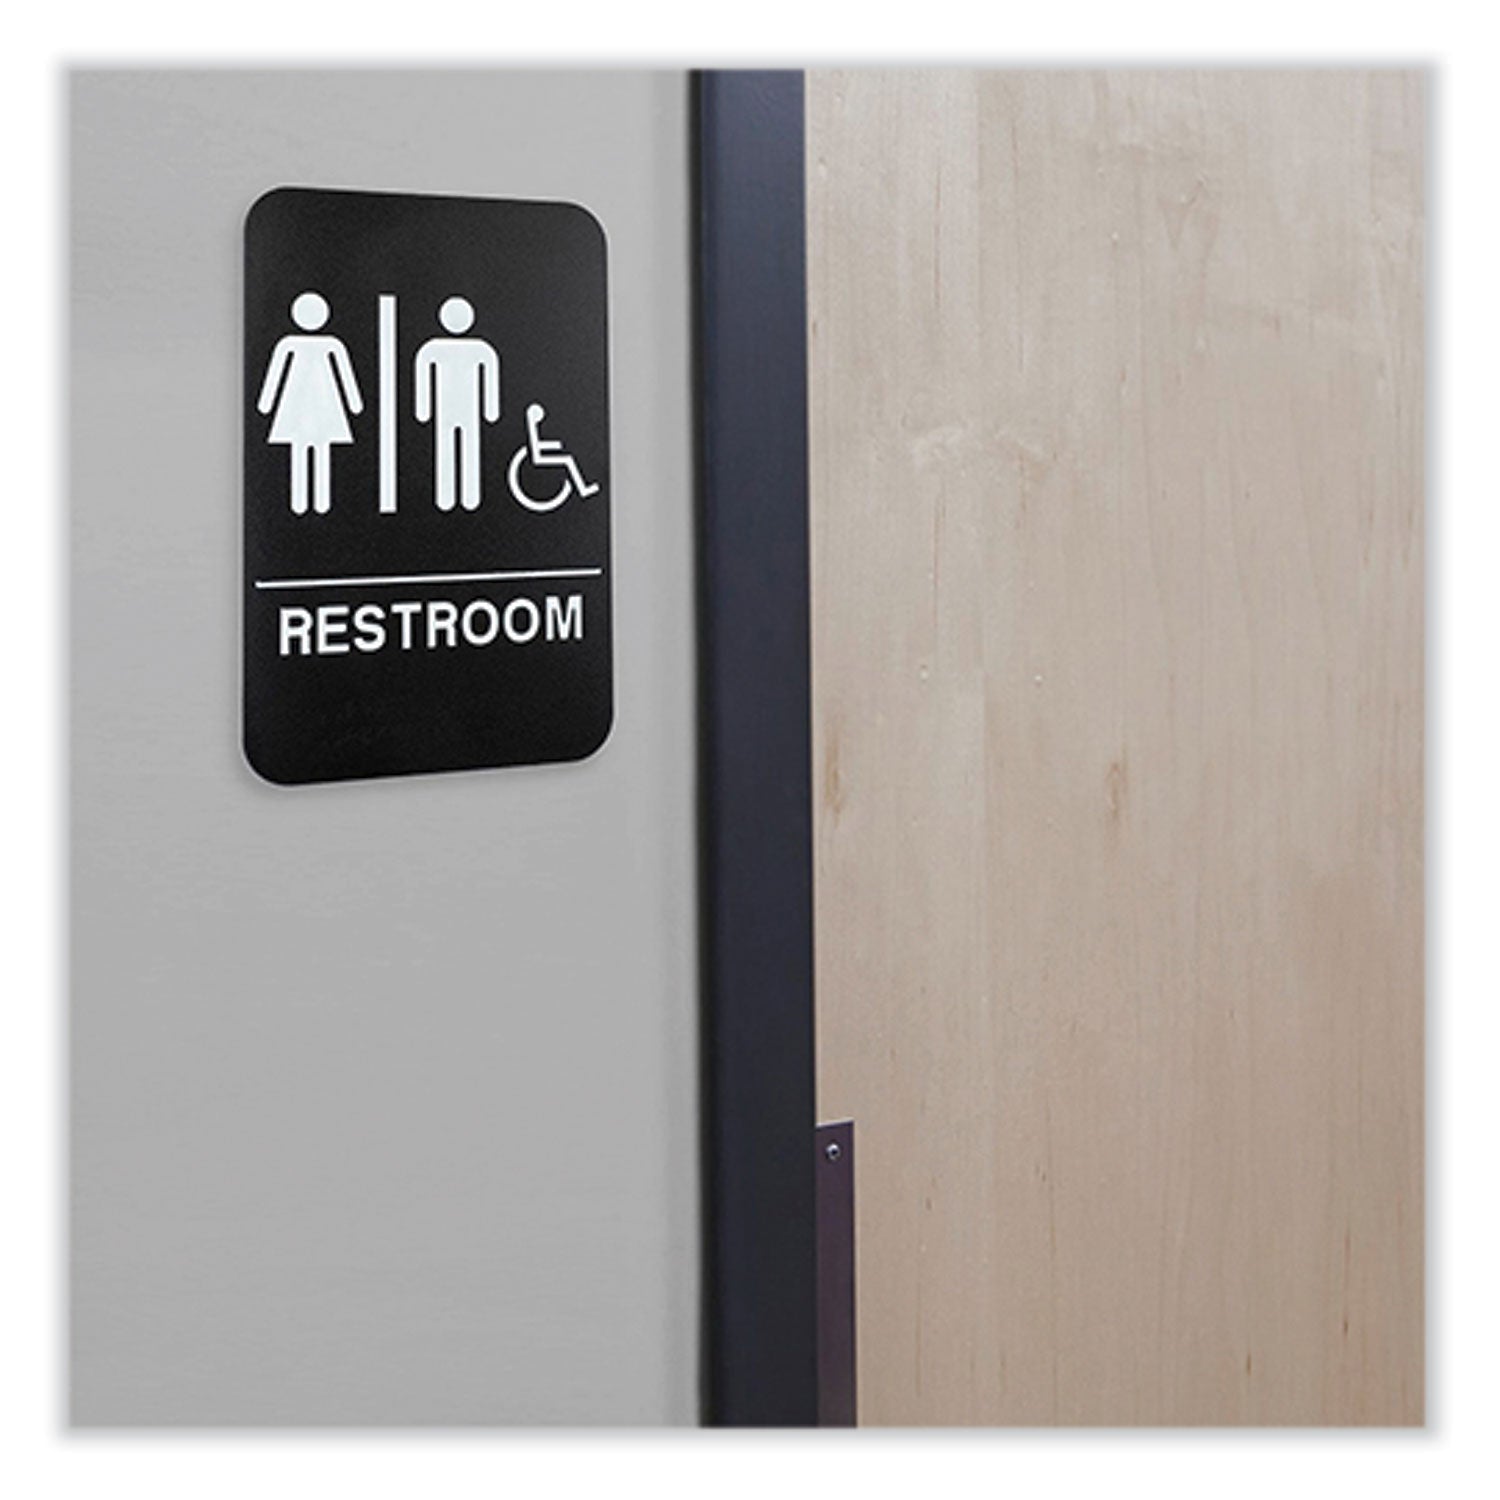 indoor-outdoor-restroom-sign-with-braille-text-and-wheelchair-6-x-9-black-face-white-graphics-3-pack_exohd0036s - 4